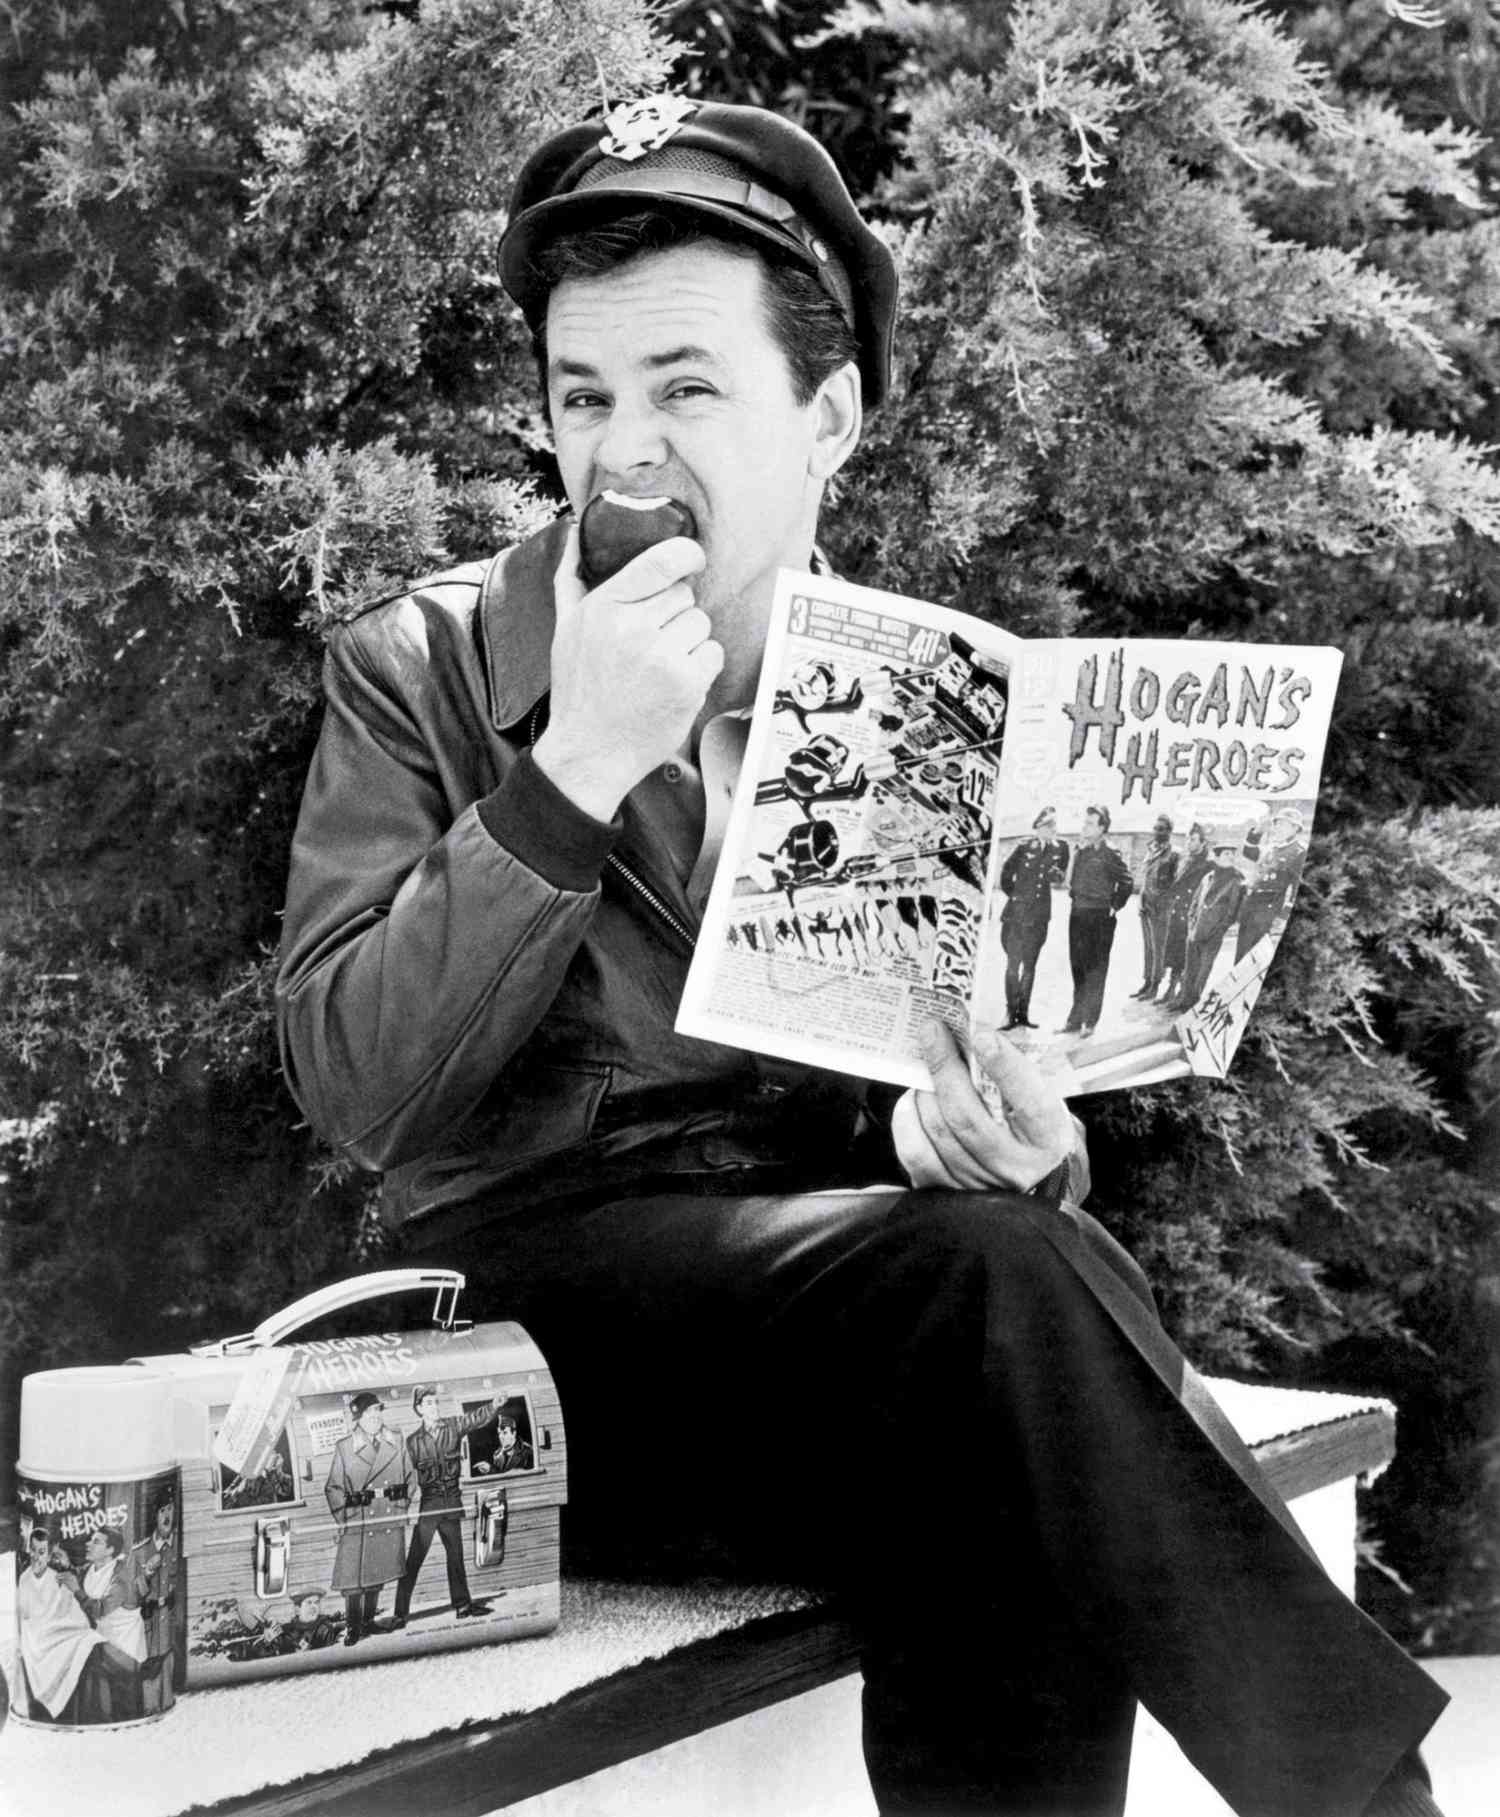 HOGAN'S HEROES, Bob Crane with thermos, lunchbox and comic book all product spinoffs from the show, 1965-1971